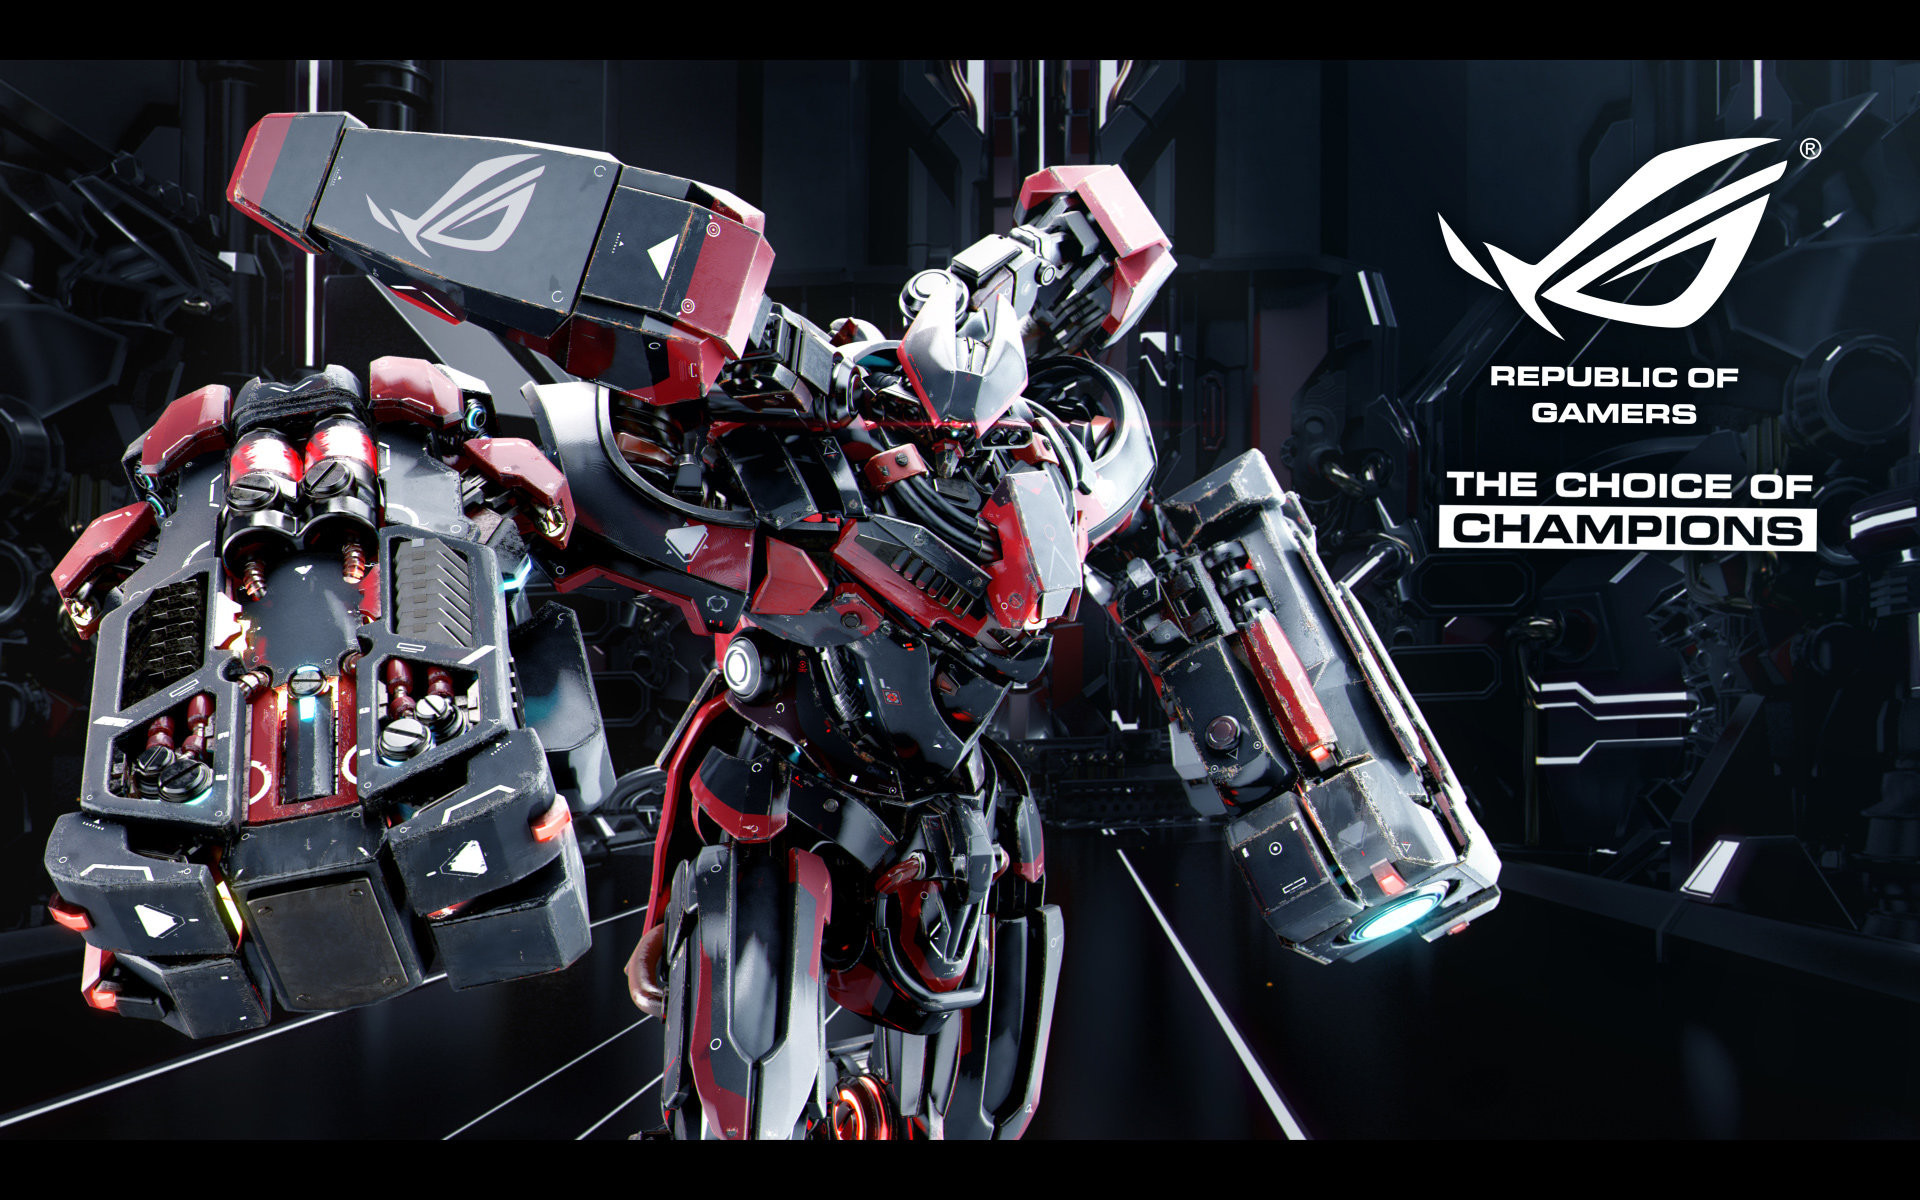 1920x1200 New ROG Wallpapers [Mecha!] - Aug 2013 - WQHD and 4K now available.  [Archive] - ASUS Republic of Gamers [ROG] | The Choice of Champions –  Overclocking, ...